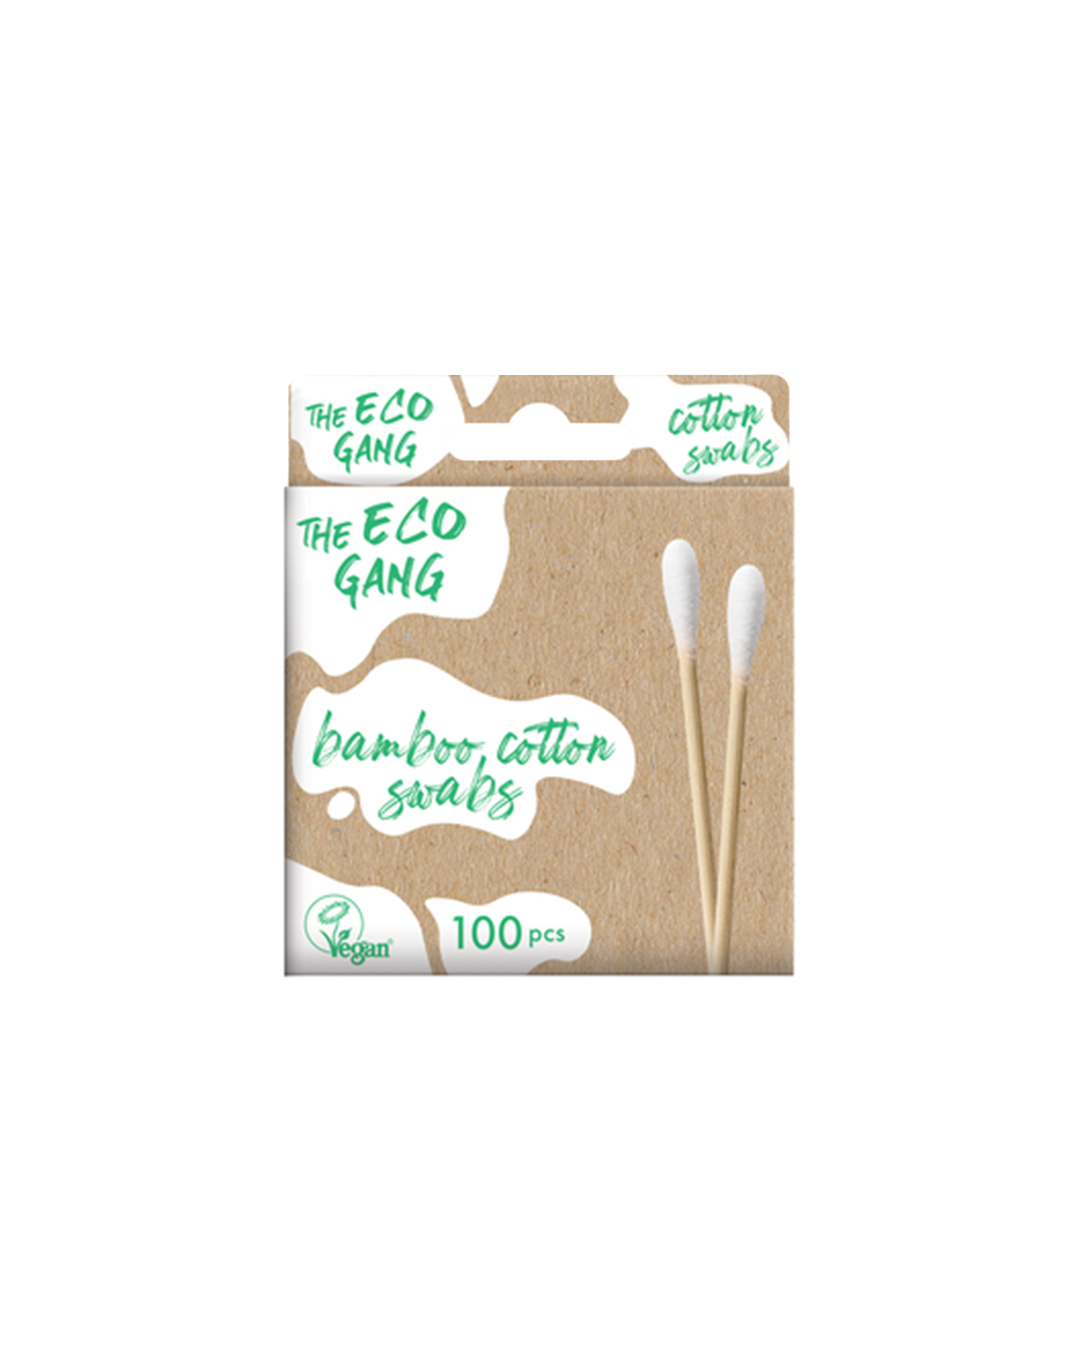 The Eco Gang Cotton Swabs 100-p - White